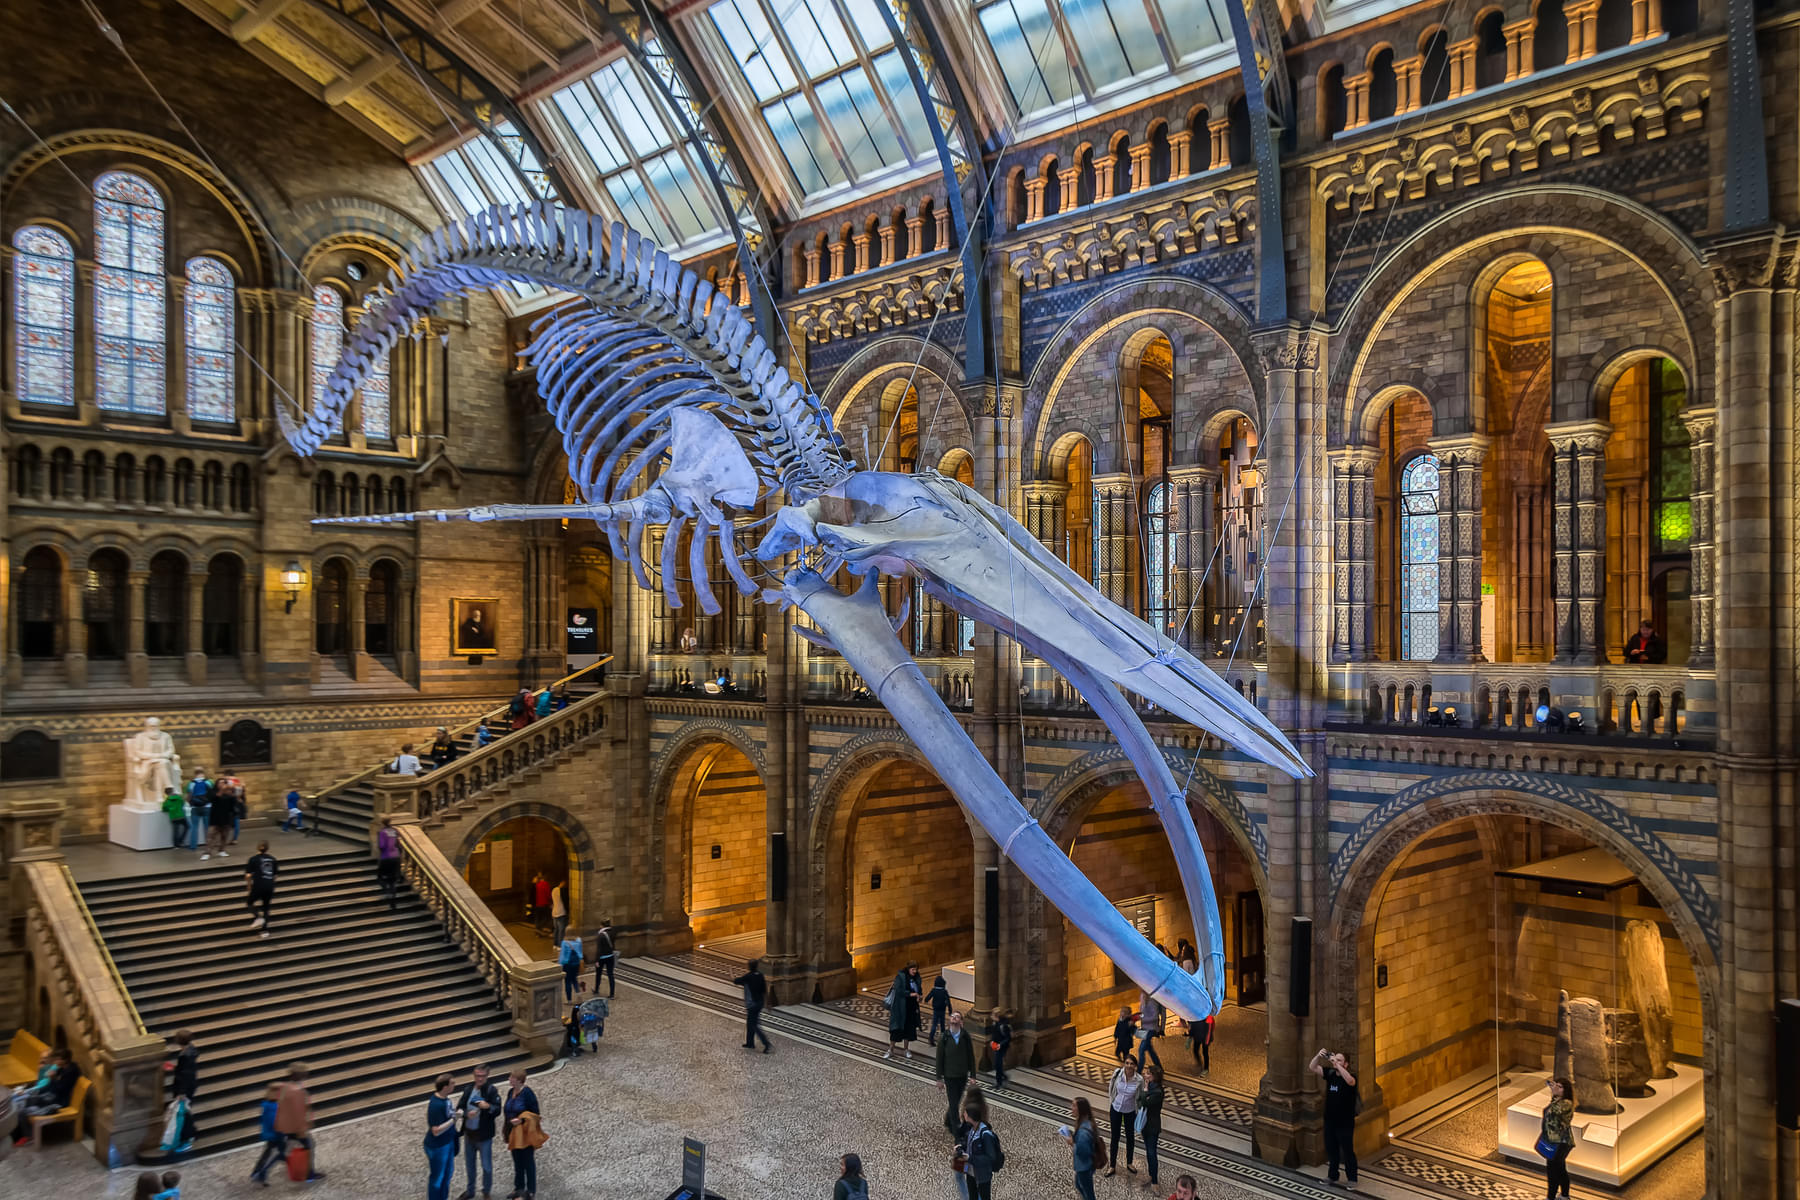 Get to know about dinosaurs in the impressive dinosaur gallery